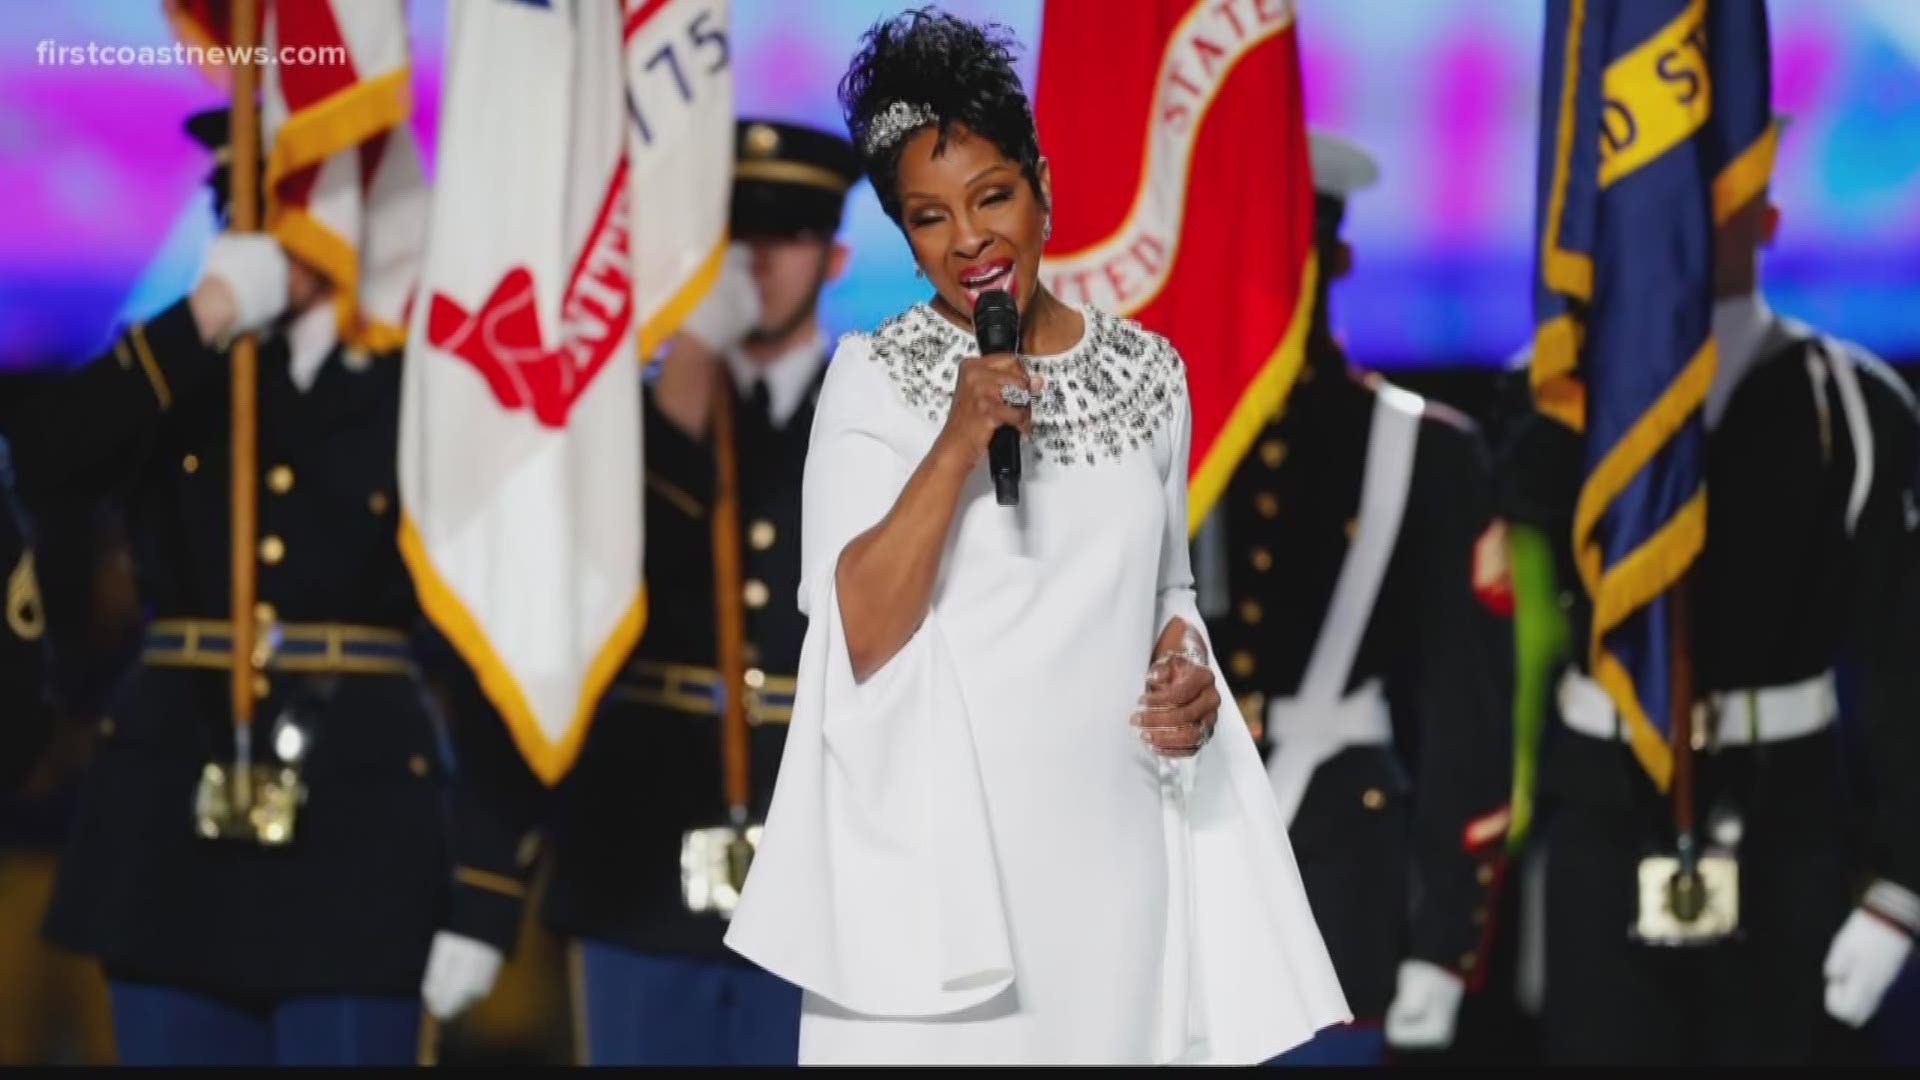 Gladys Knight, known as the "Empress of Soul", will be headlining the May festival.